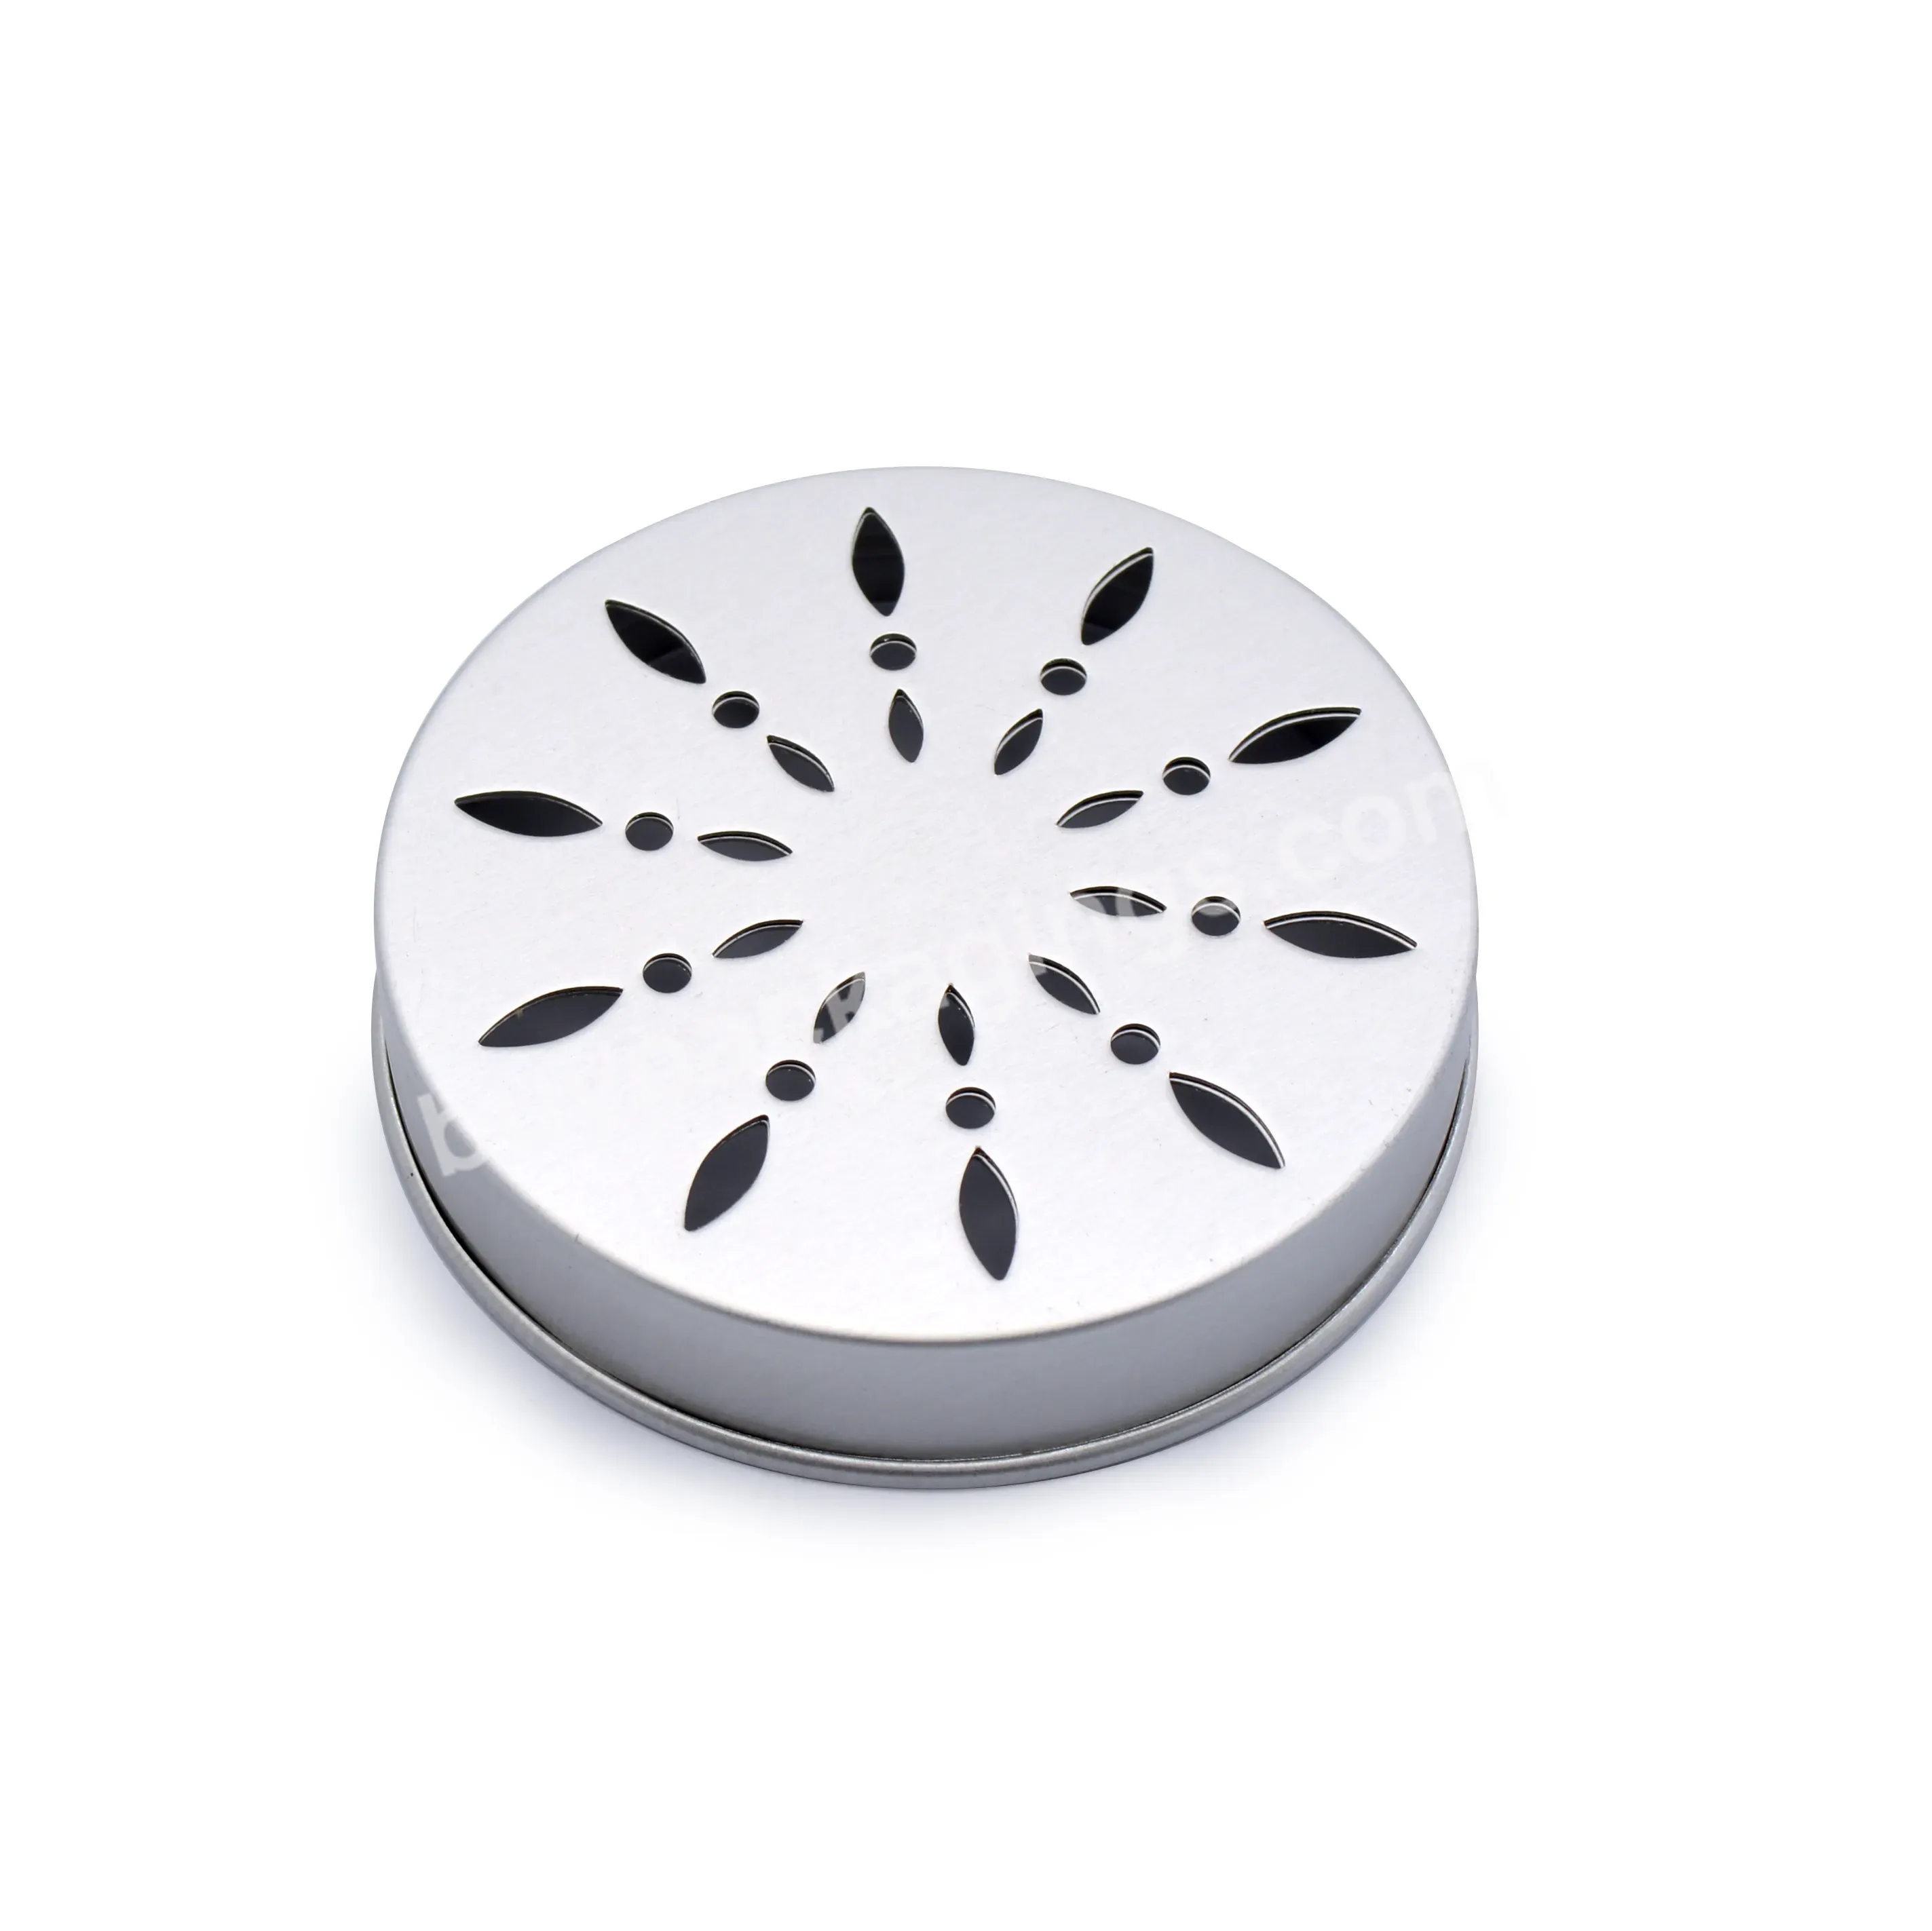 68mm Hollow Out Screw Aluminum Cover Aluminum Caps With Hole For Air Freshener Container - Buy Hollow Out Screw Cover,Aluminum Caps,Aluminum Caps With Hole.